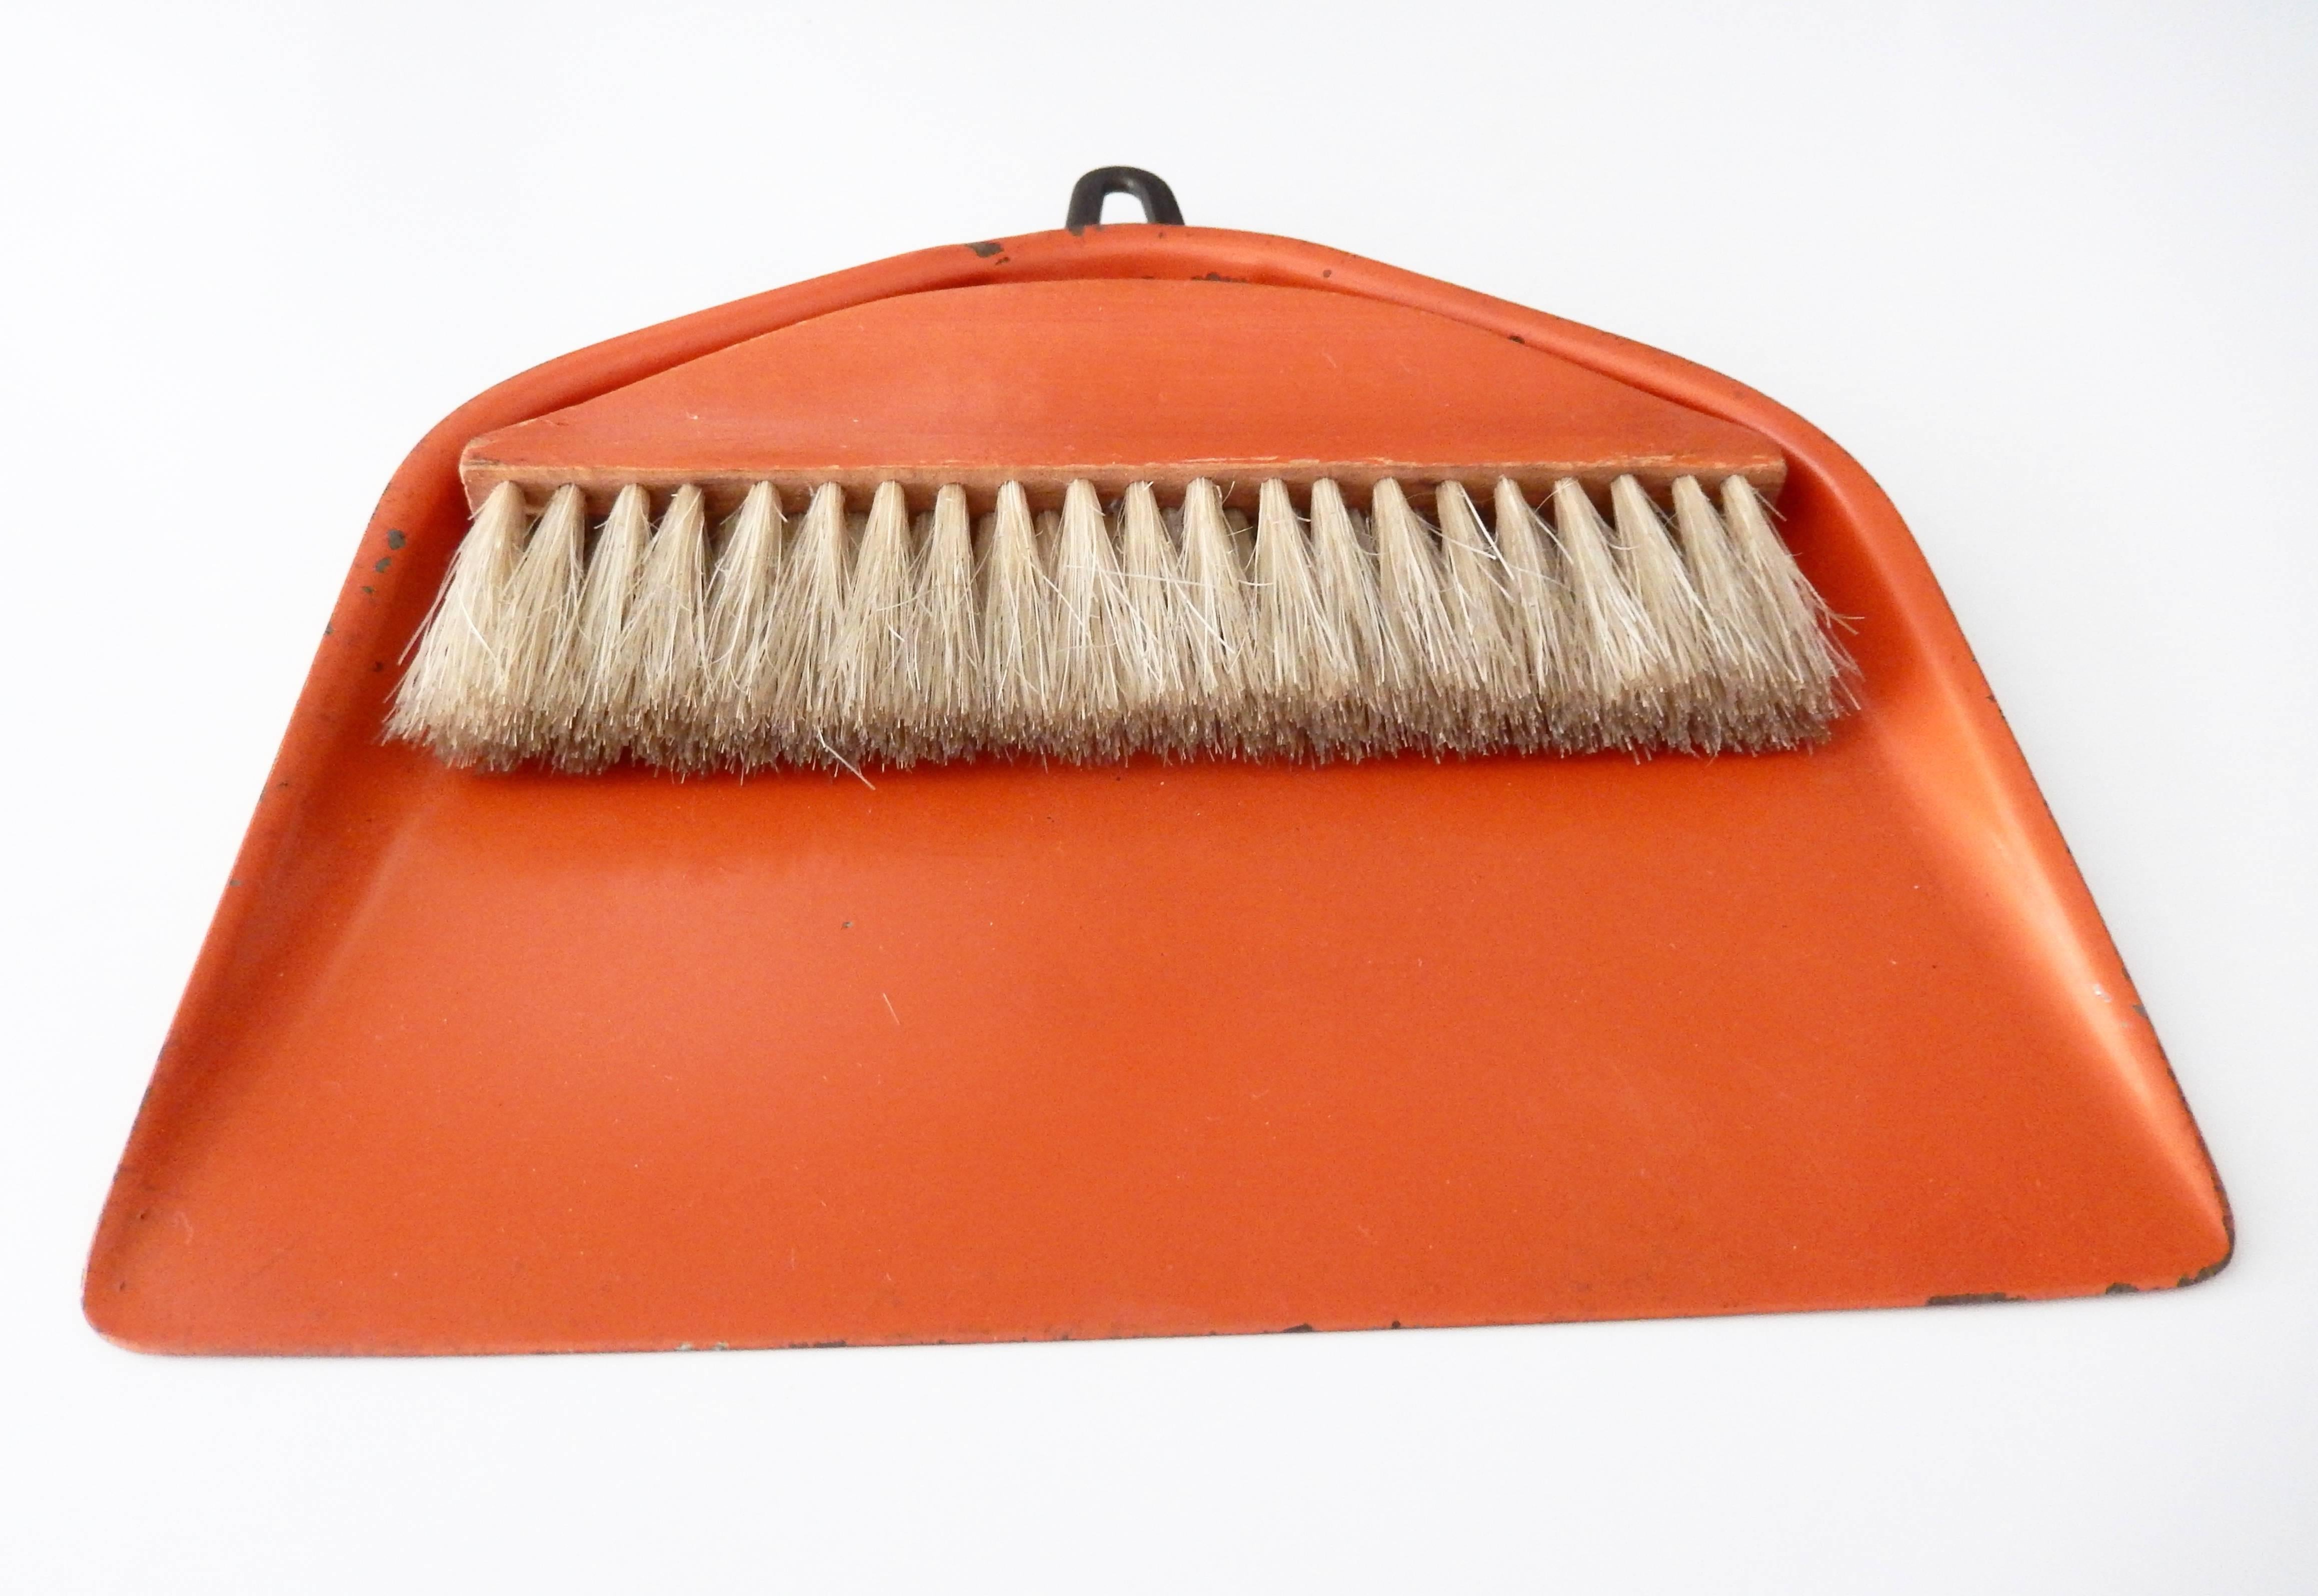 Enameled Bauhaus/Marianne Brandt Modernist Crumb Brush and Tray, circa 1929 For Sale